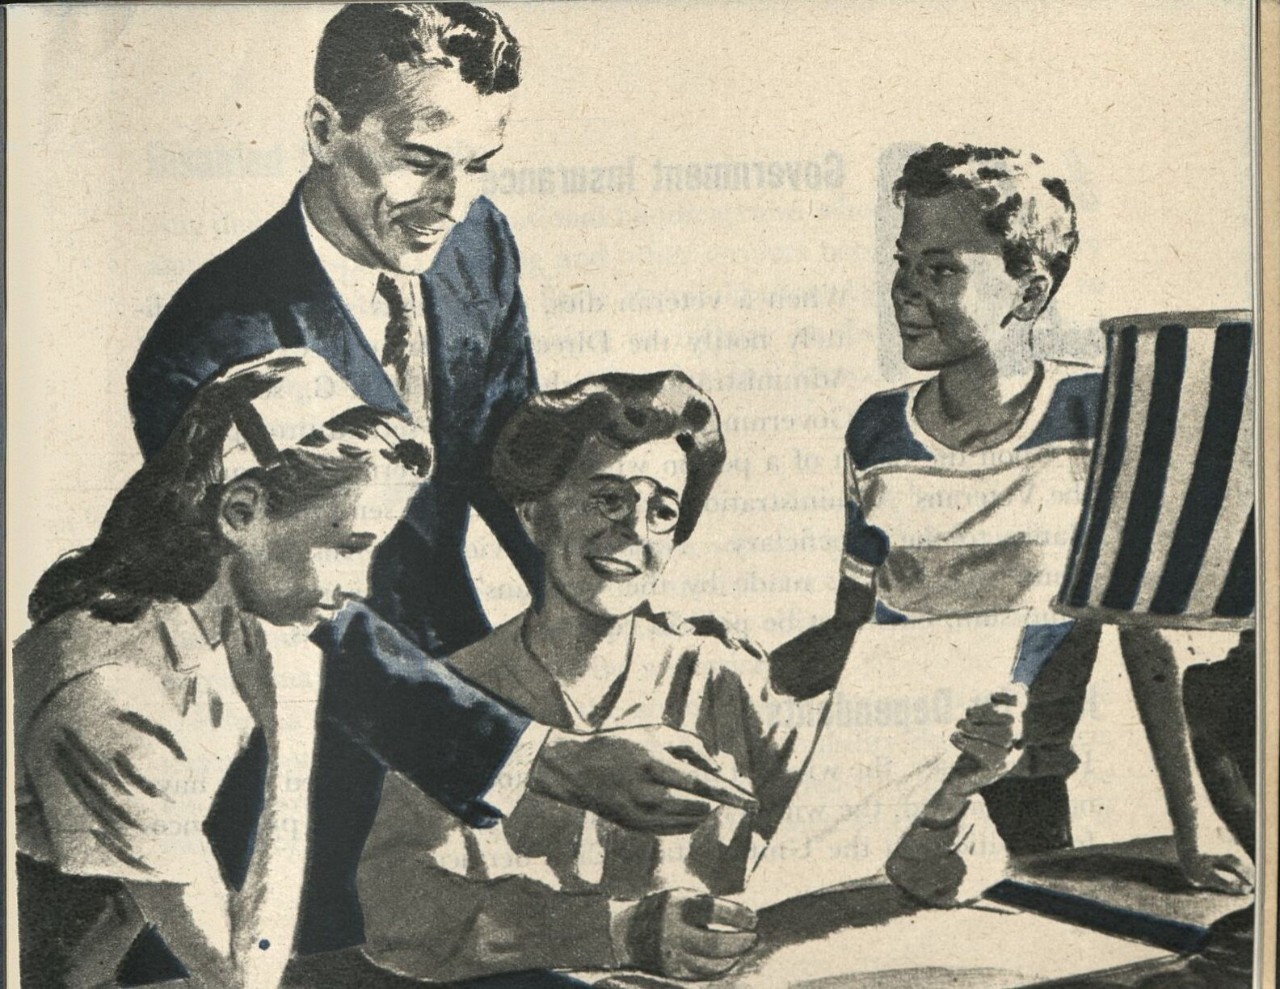 Drawing of a family - a man, woman, boy and girl reading a paper that the woman is holding up